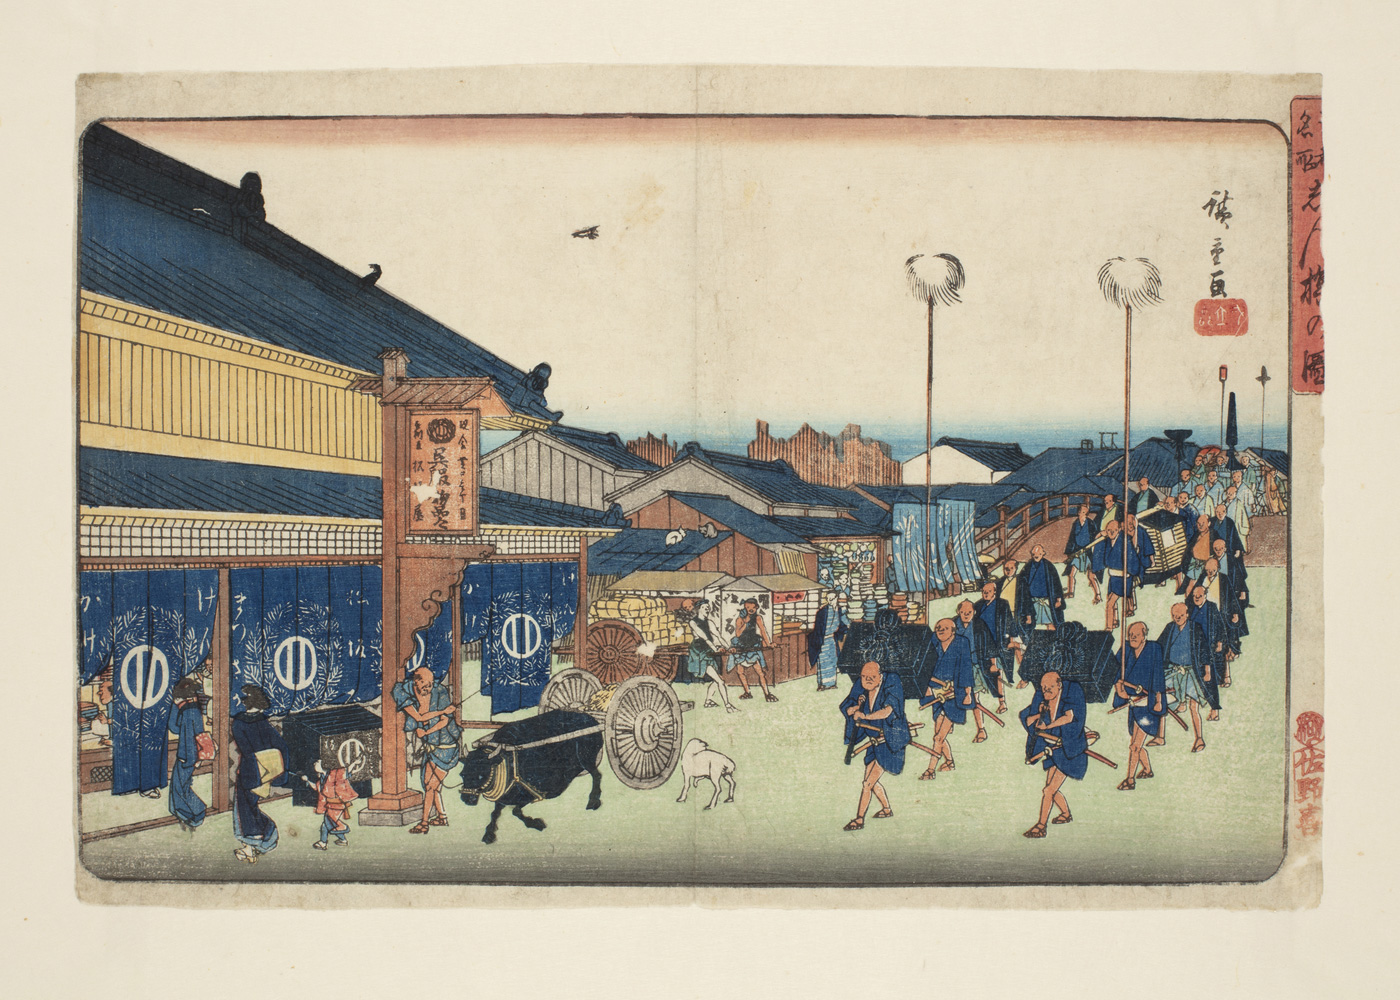 Japanese print of a procession along a street, with buildings and the sea on the horizon. In the foreground is an ox pulling a cart with a driver by its side, behind men, in rows, carry trunks on their backs, others carry tall poles, the procession recedes back over a bridge and into the distamce.